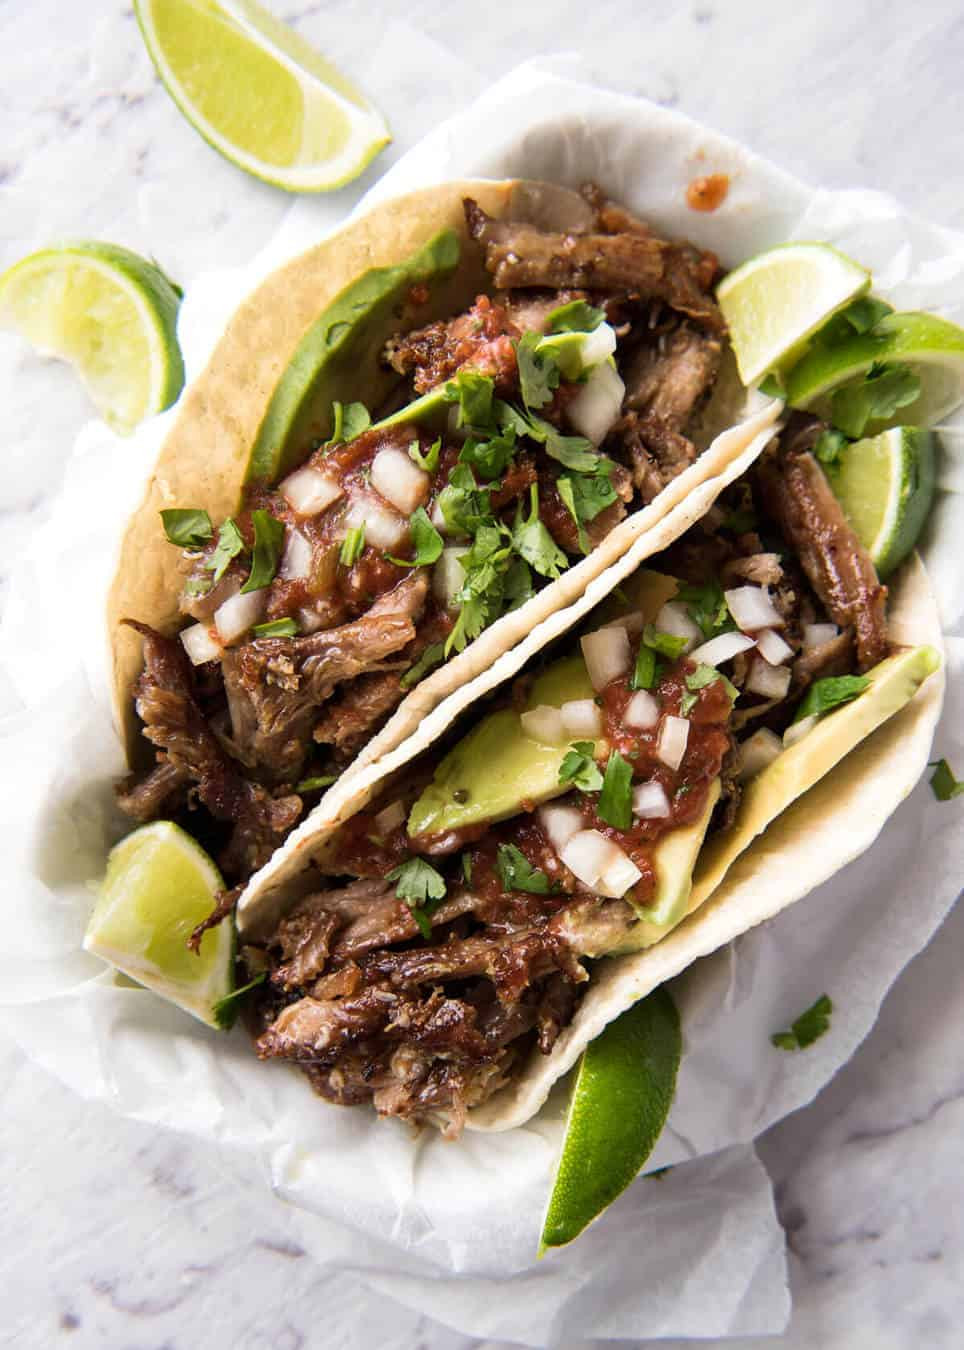 Pictures Of Mexican Tacos
 Mexican Pulled Pork Tacos Carnitas Good Food & Wine